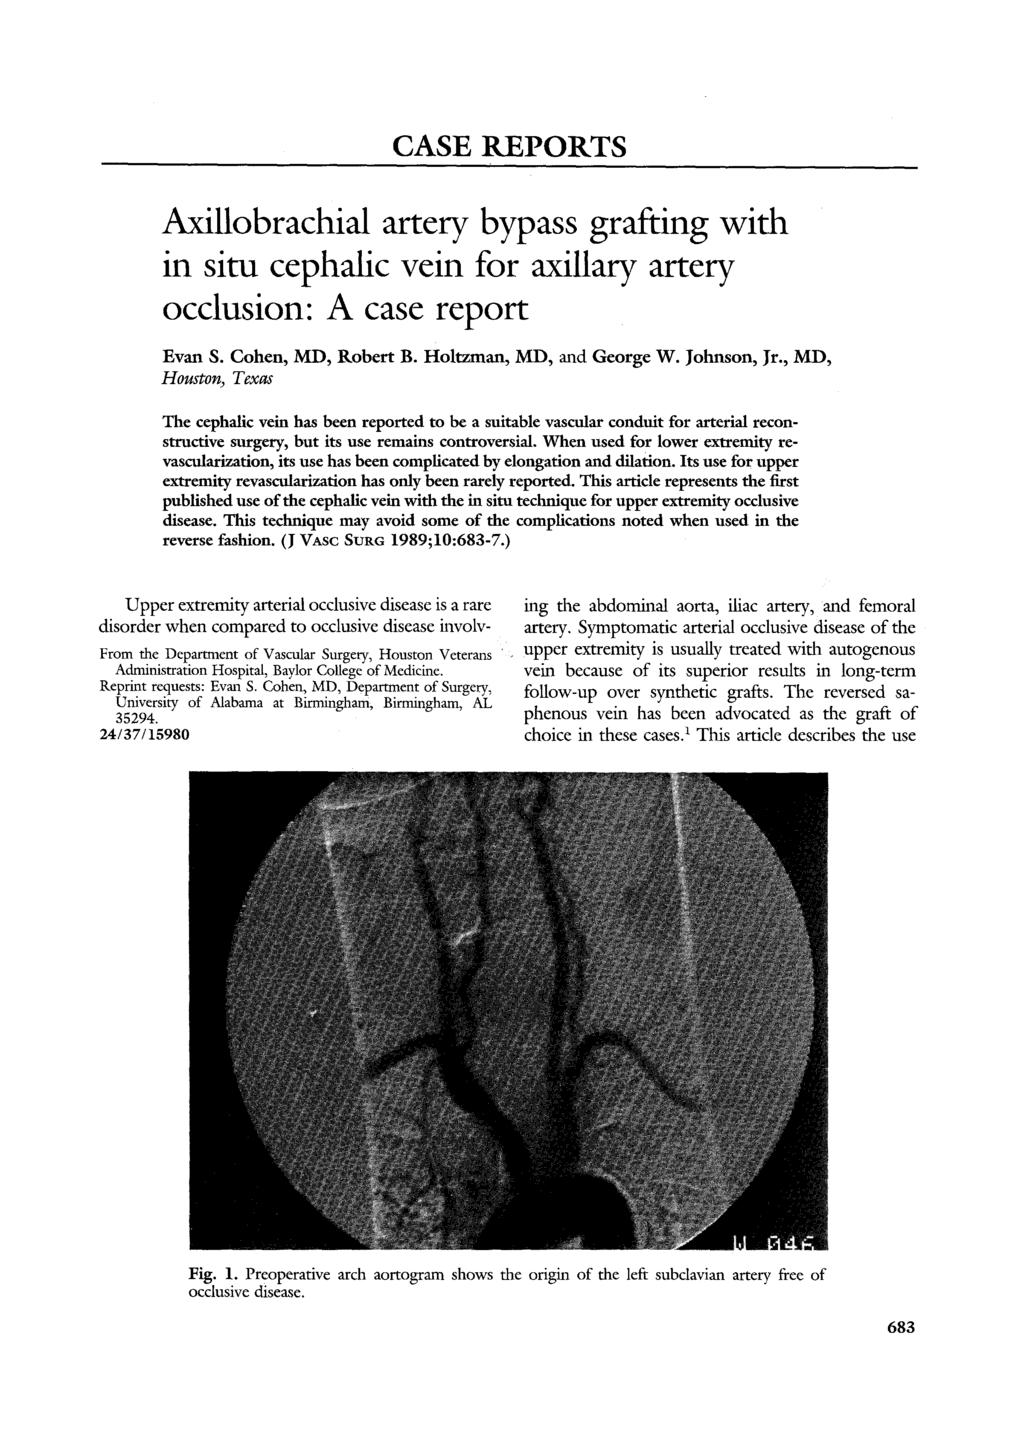 CASE REPORTS Axillobrachial artery bypass grafting with in situ cephalic vein for axillary artery occlusion: A case report Evan S. Cohen,/VII), Robert B. Holtzman, MD, and George W. Johnson, Jr.